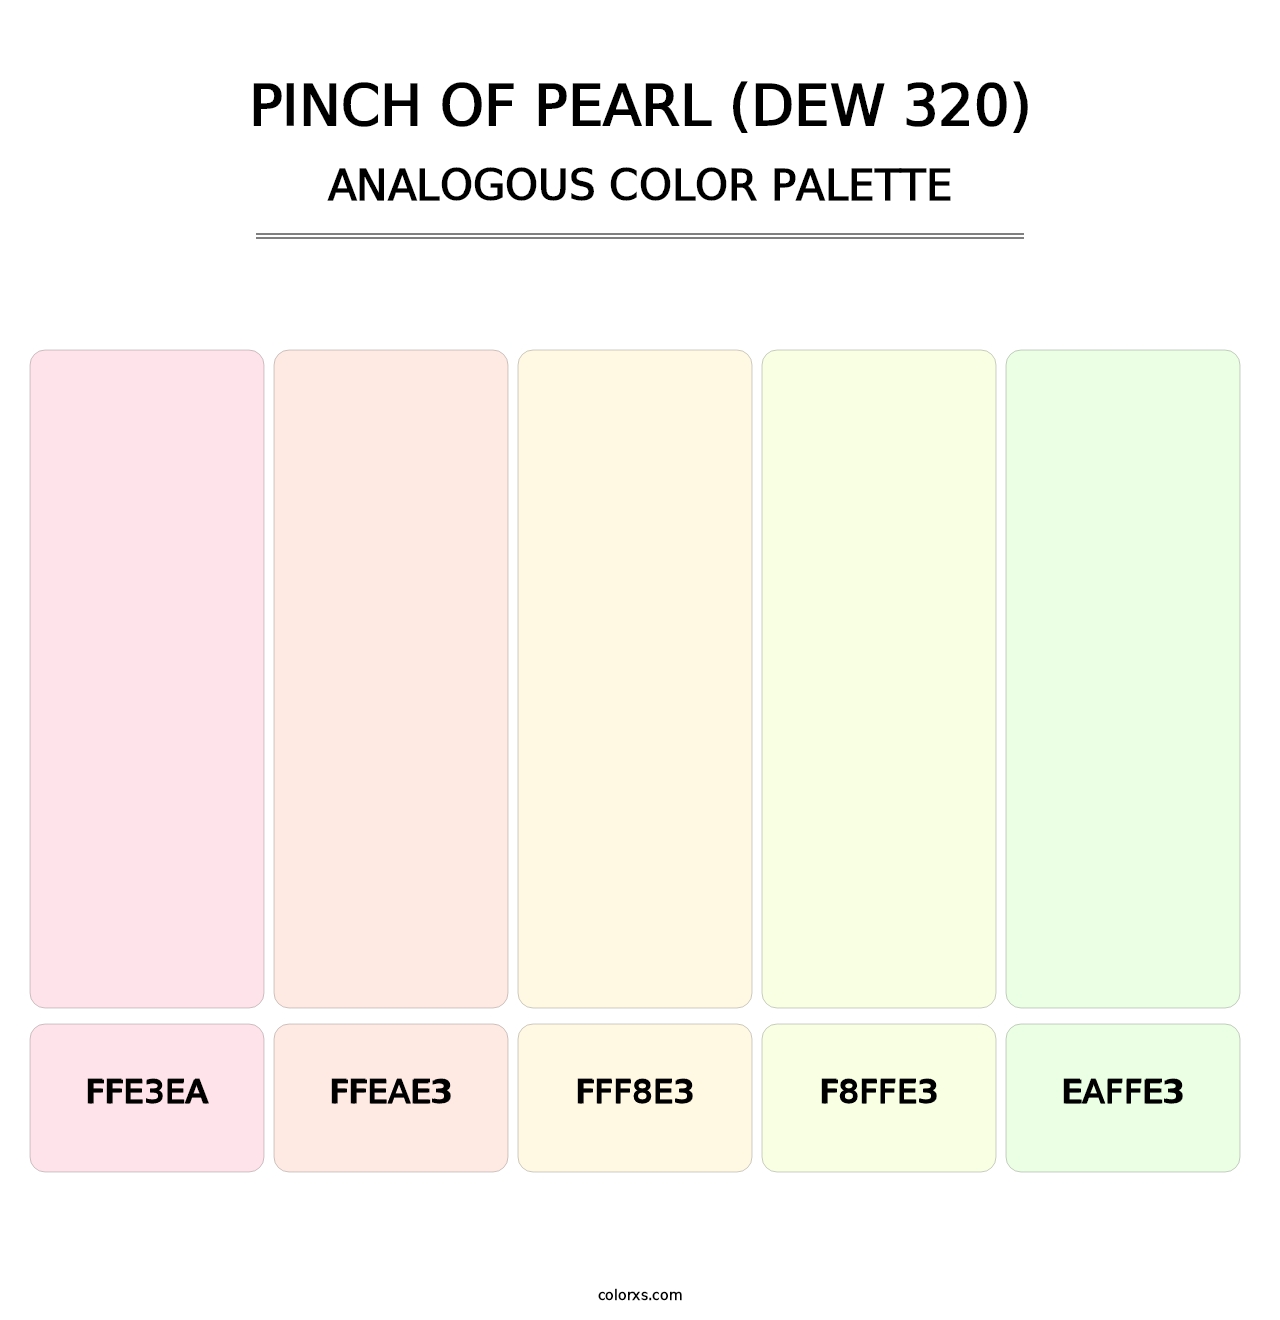 Pinch of Pearl (DEW 320) - Analogous Color Palette